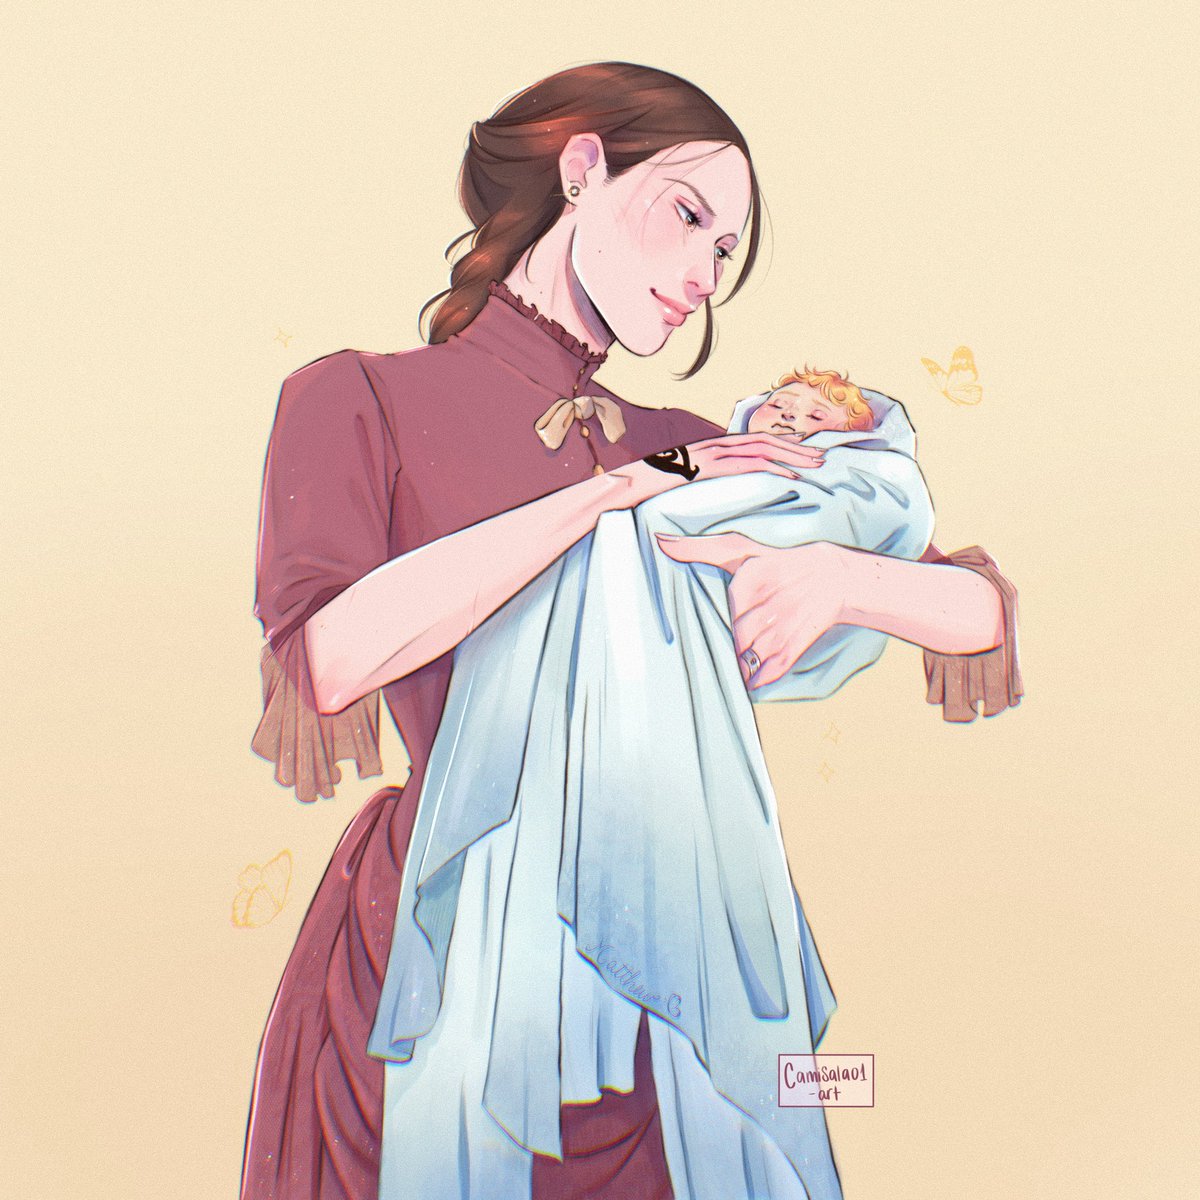 Mother and son (part 1) 🩵
Charlotte and baby Matthew - characters belong to @cassieclare